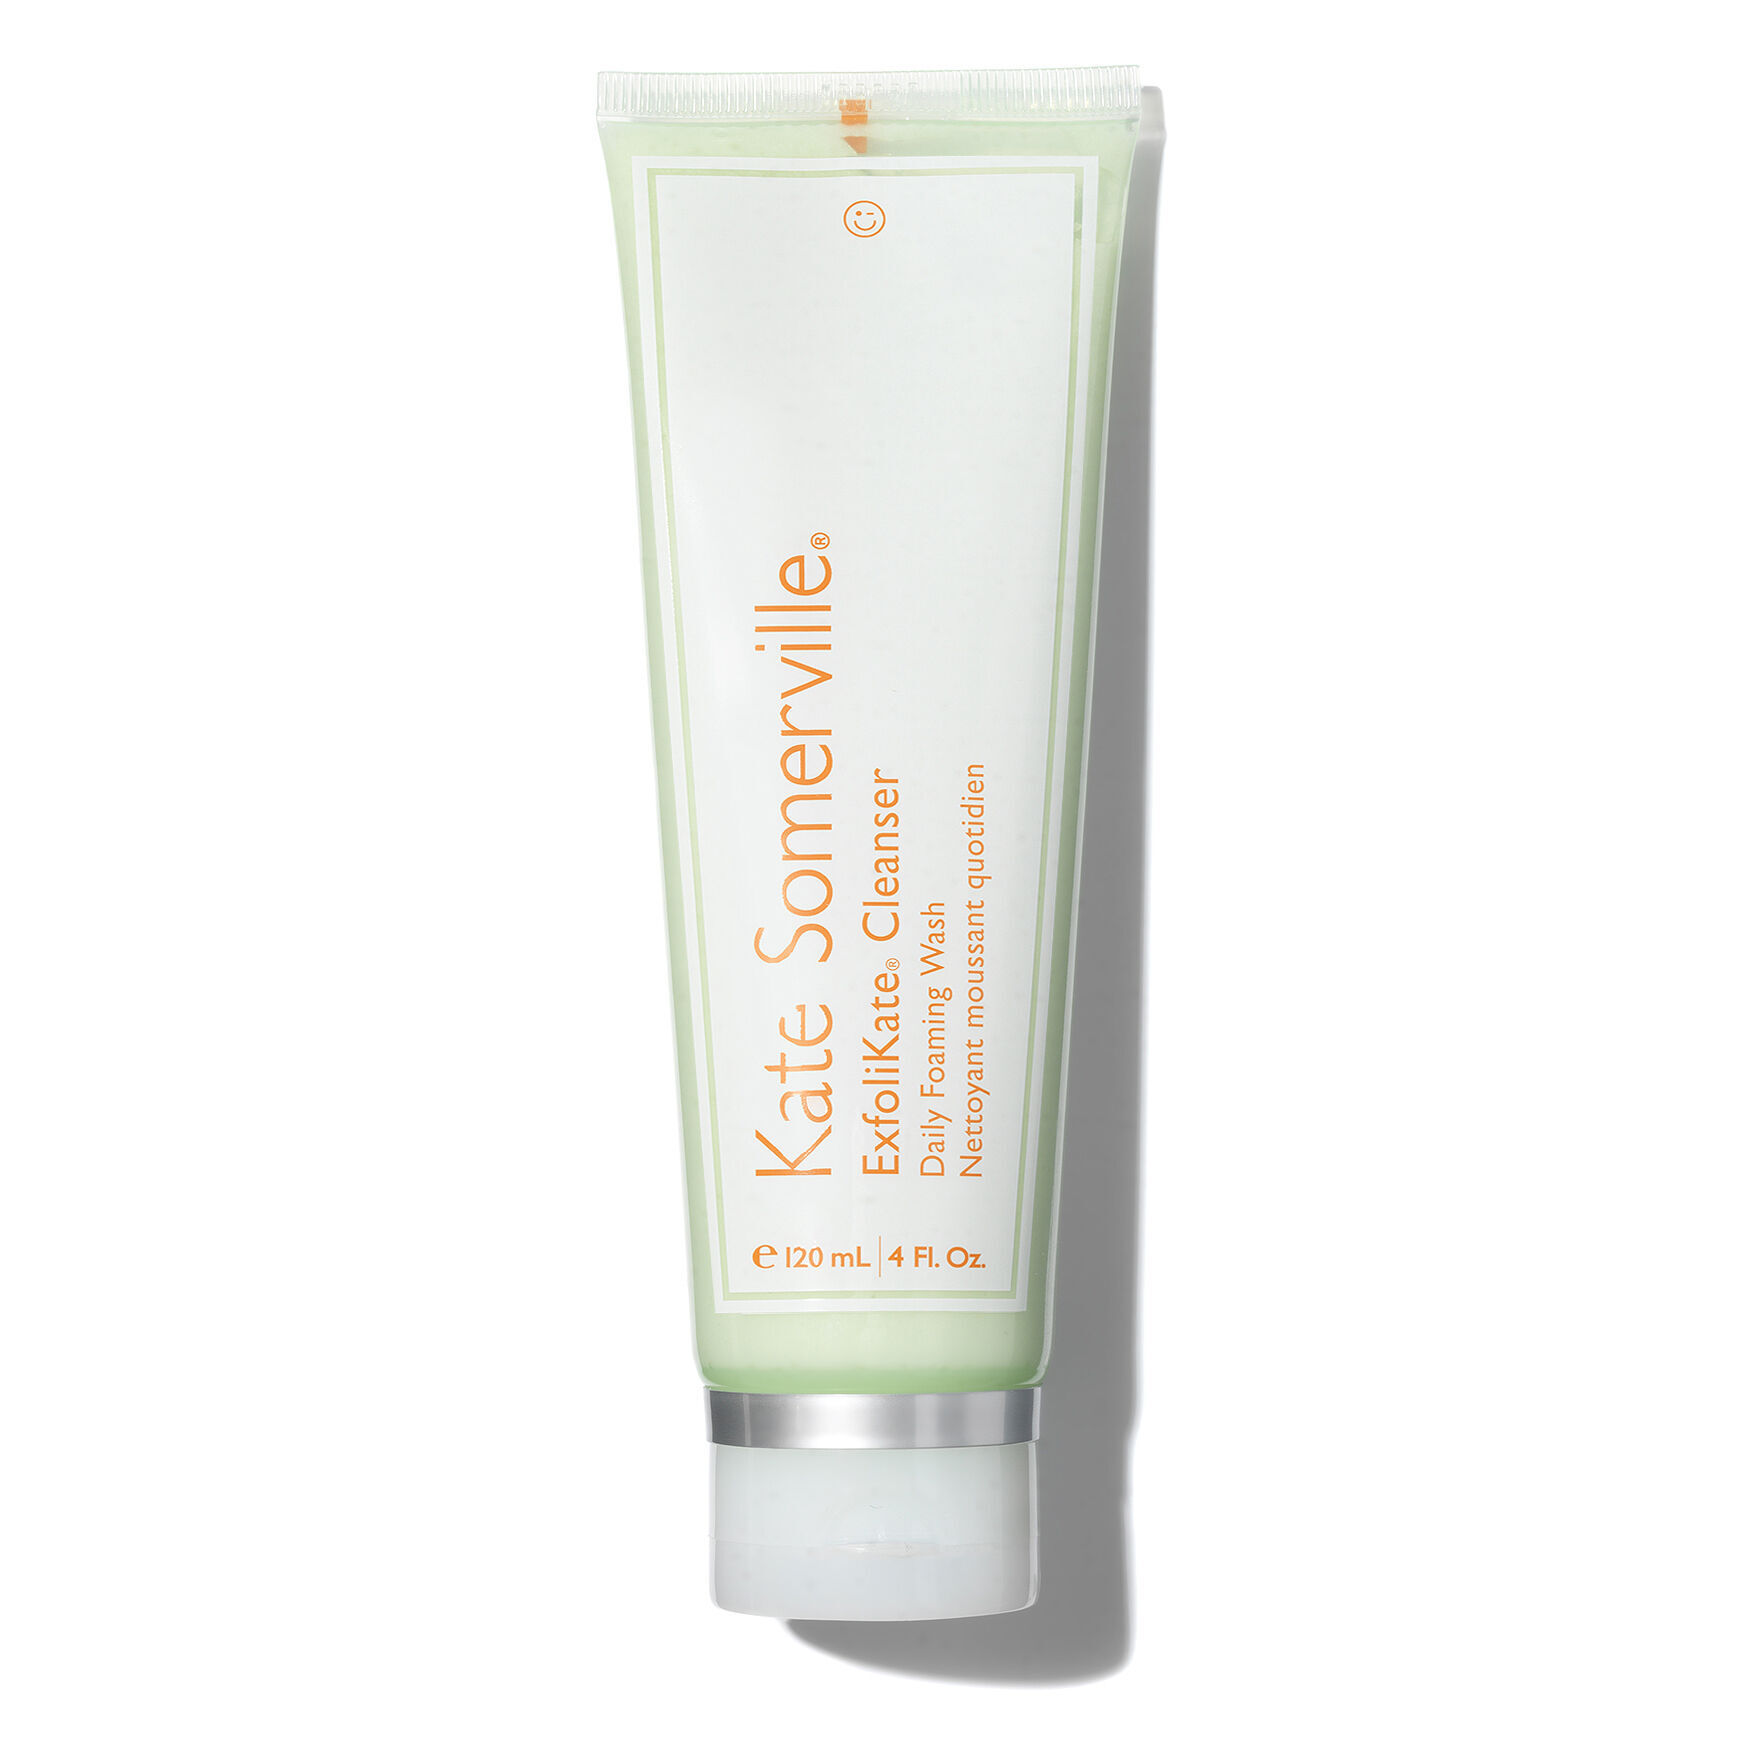 Kate Somerville - ExfoliKate Cleanser Daily Foaming Wash by Kate Somerville